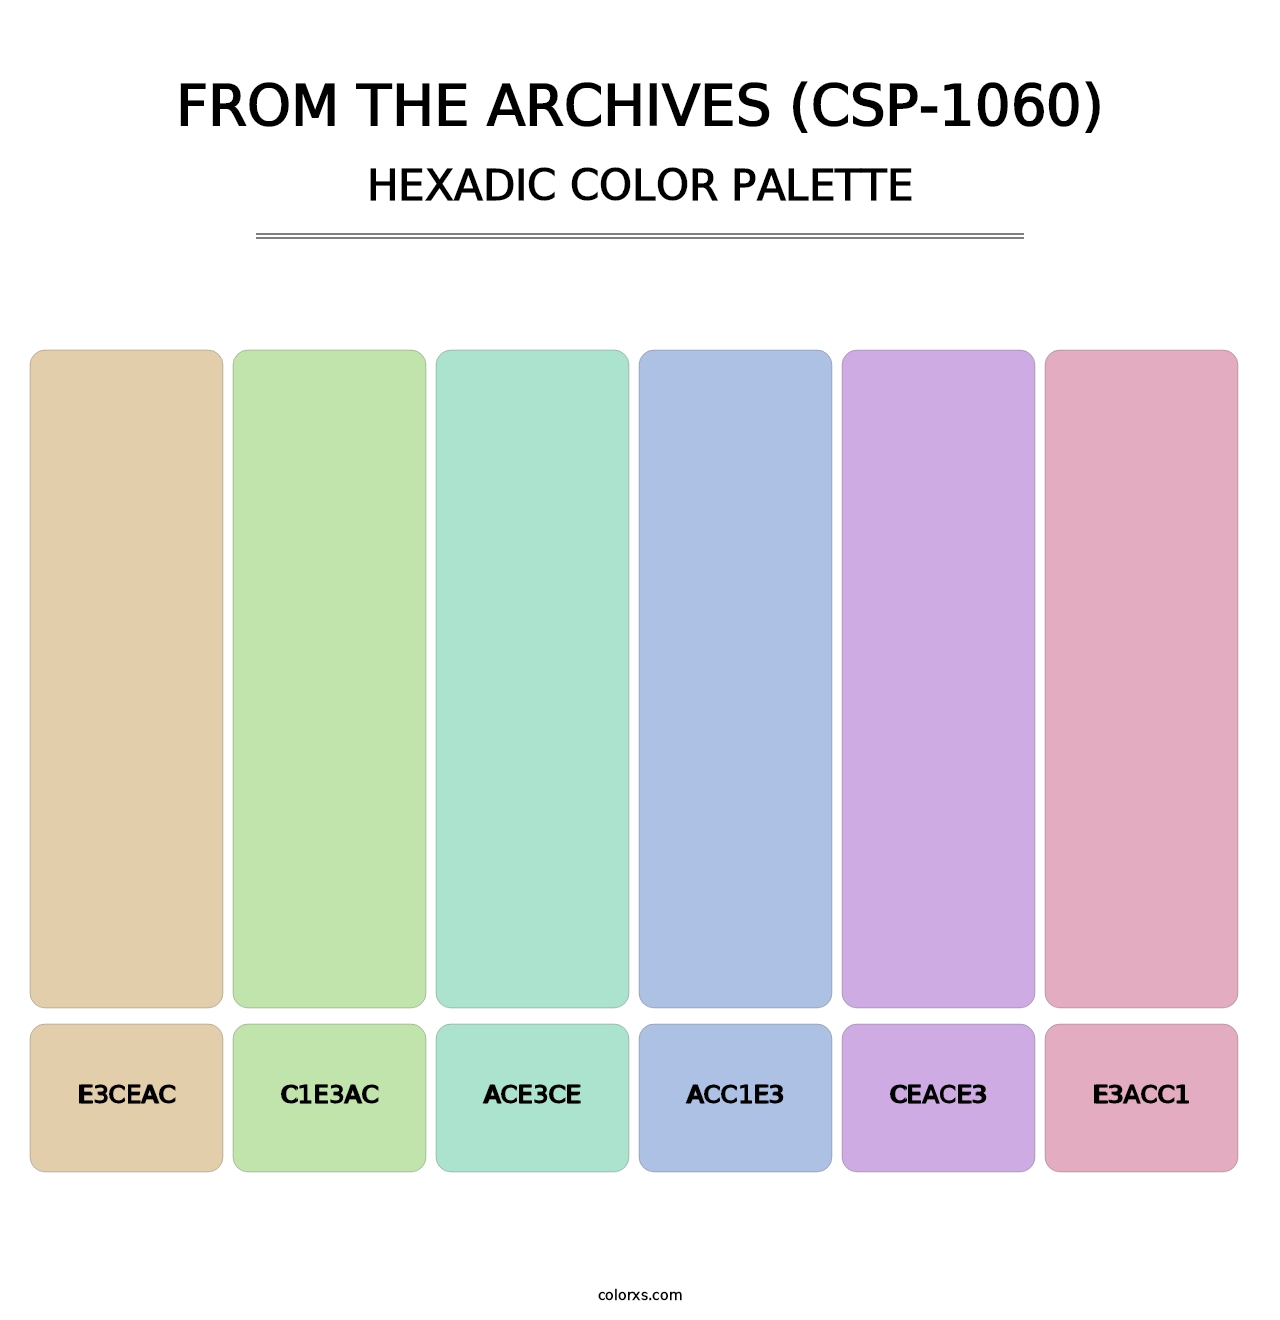 From the Archives (CSP-1060) - Hexadic Color Palette